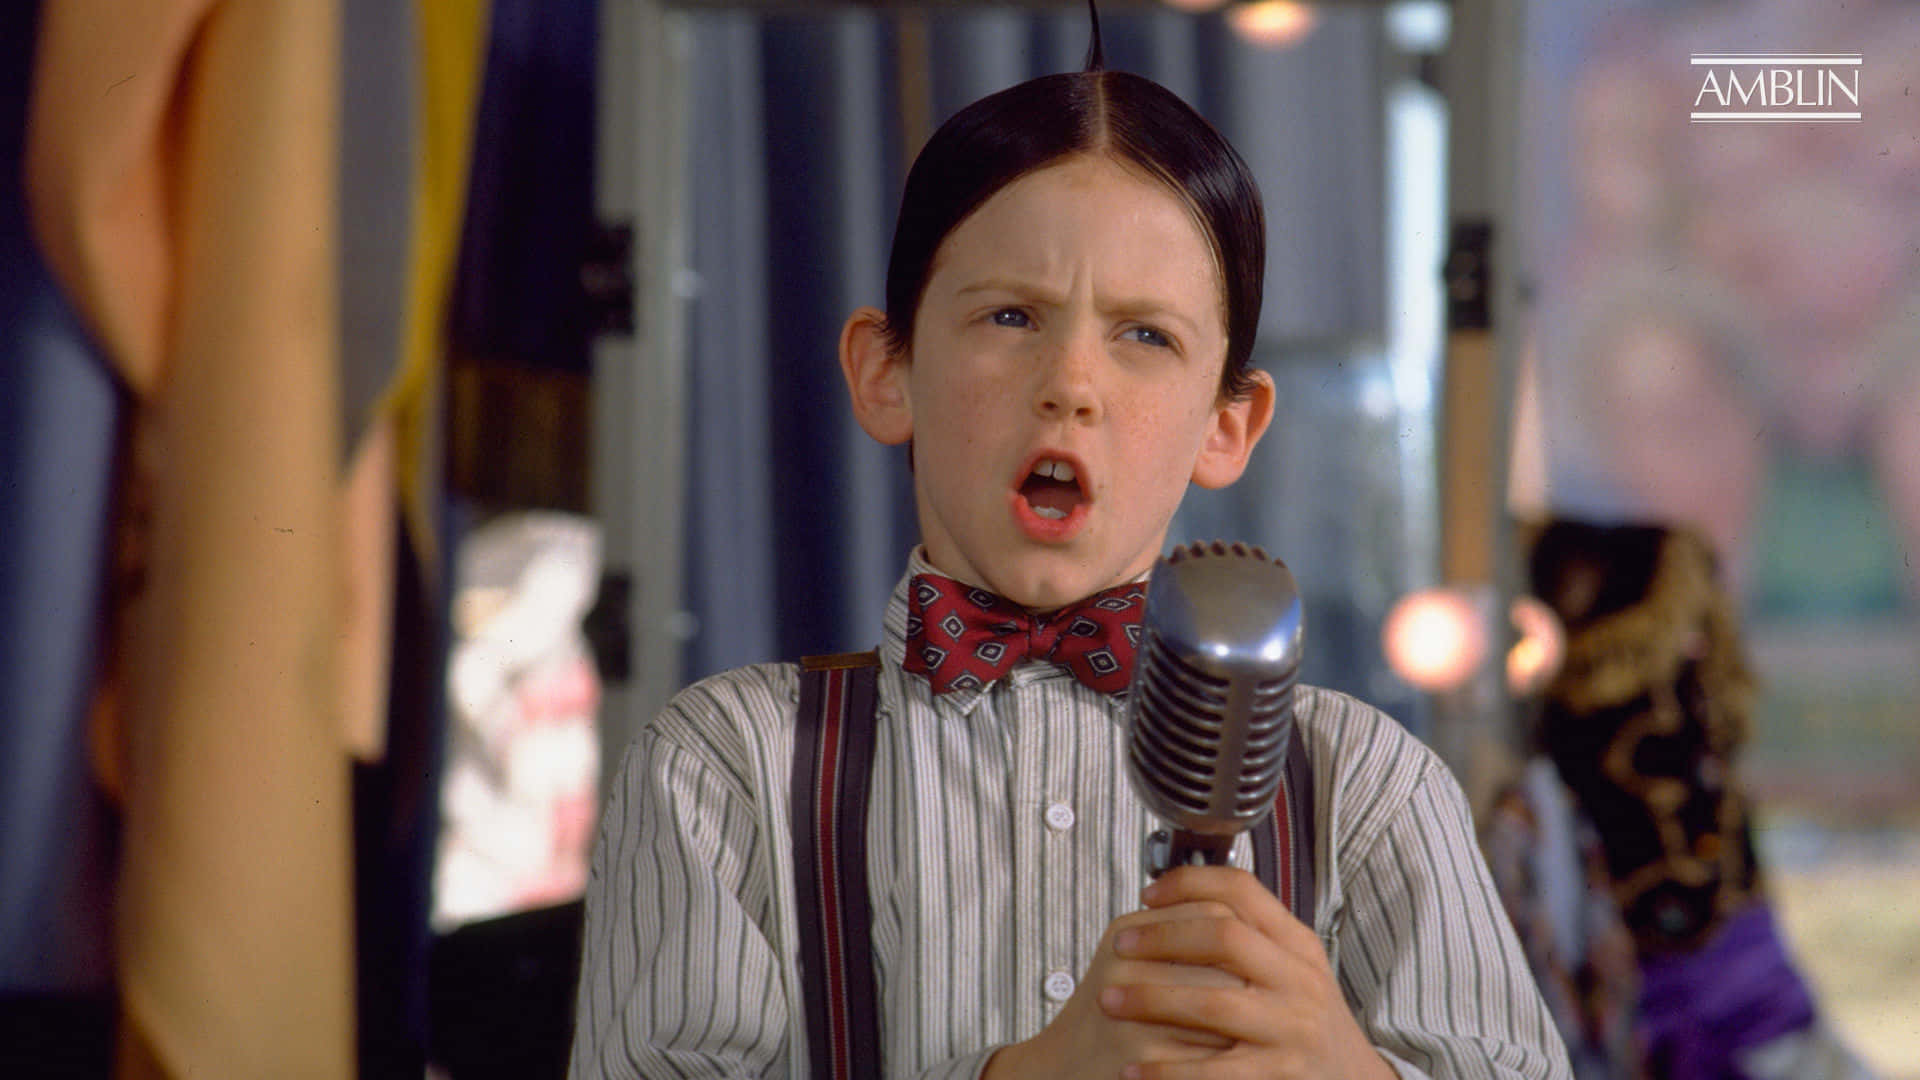 A Boy In A Suspenders Holding A Microphone